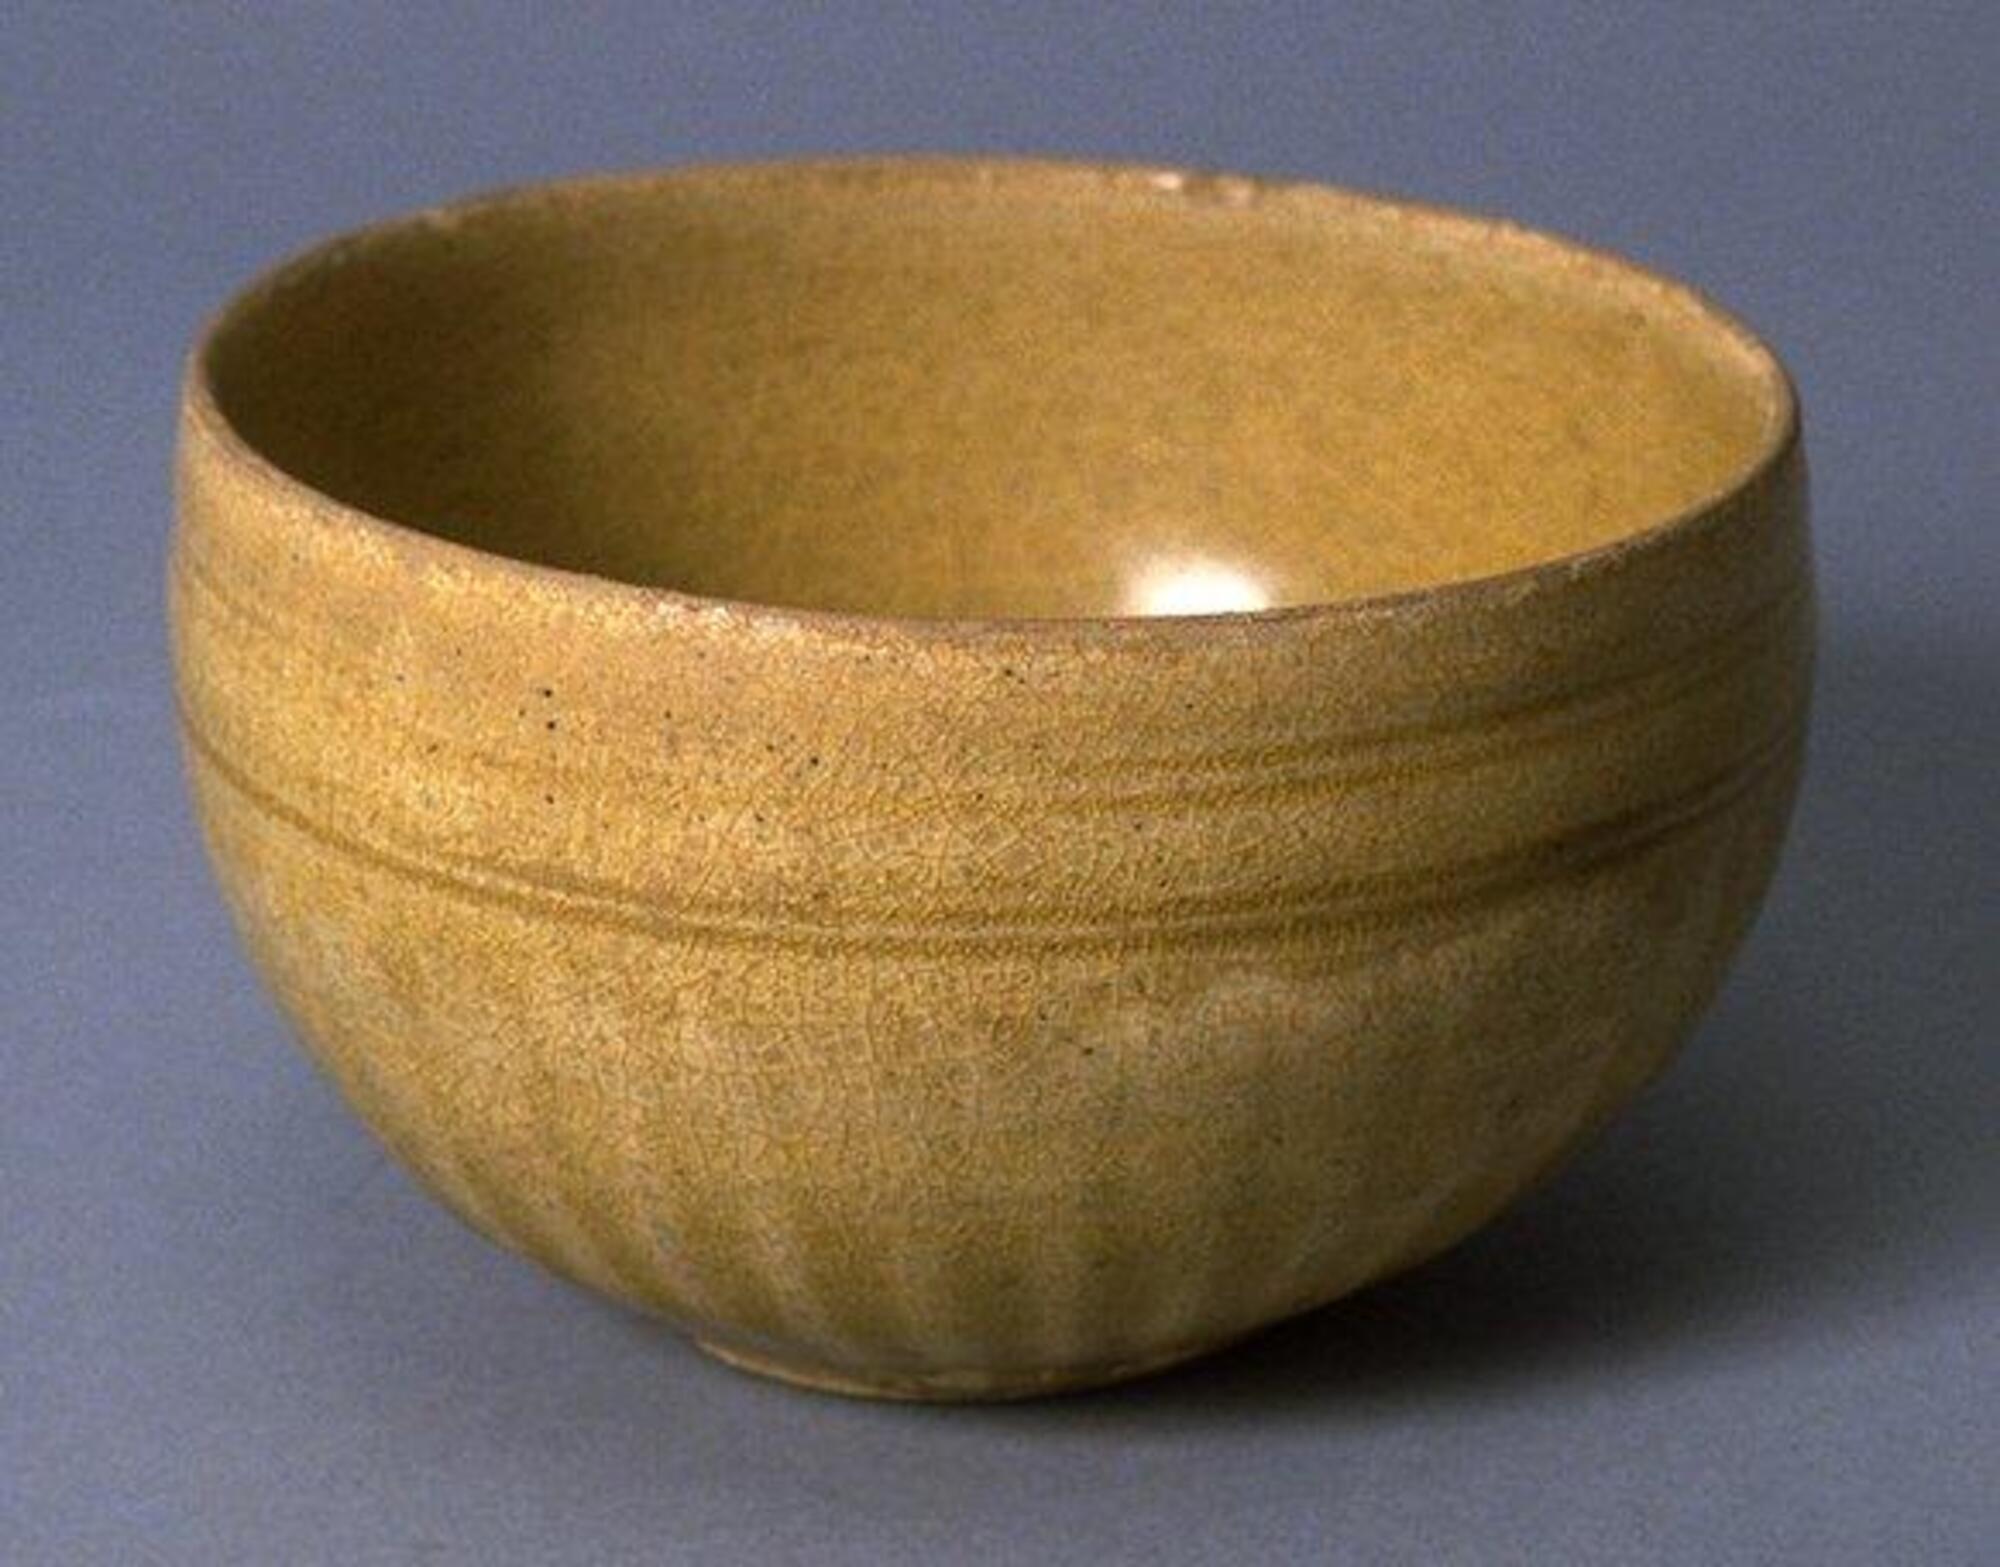 A rounded bowl, its lower two-thirds carved as a lotus blossom centered on the foot of the bowl, with two bands of double incised lines around the rim area. The pale yellow-brown glaze is worn in some areas. Five spur marks inside.